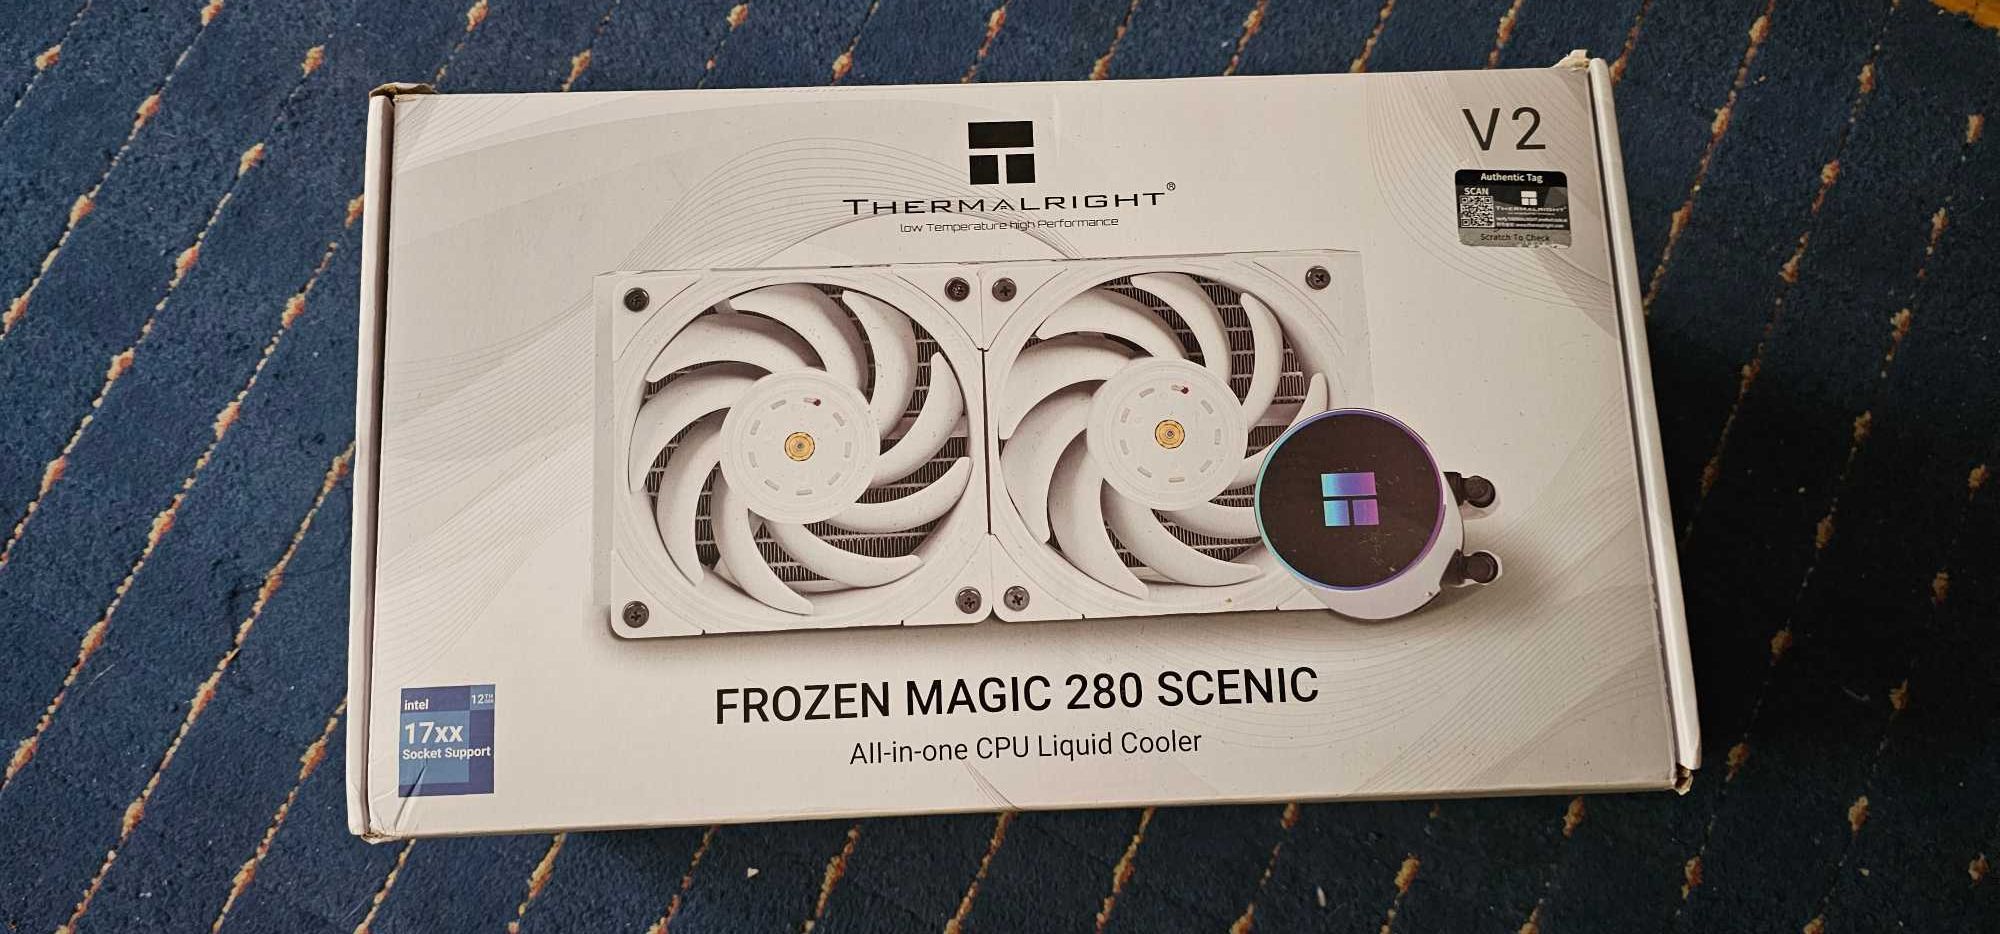 cooler procesor Thermalright Frozen Magic 280 Scenic V2 am5